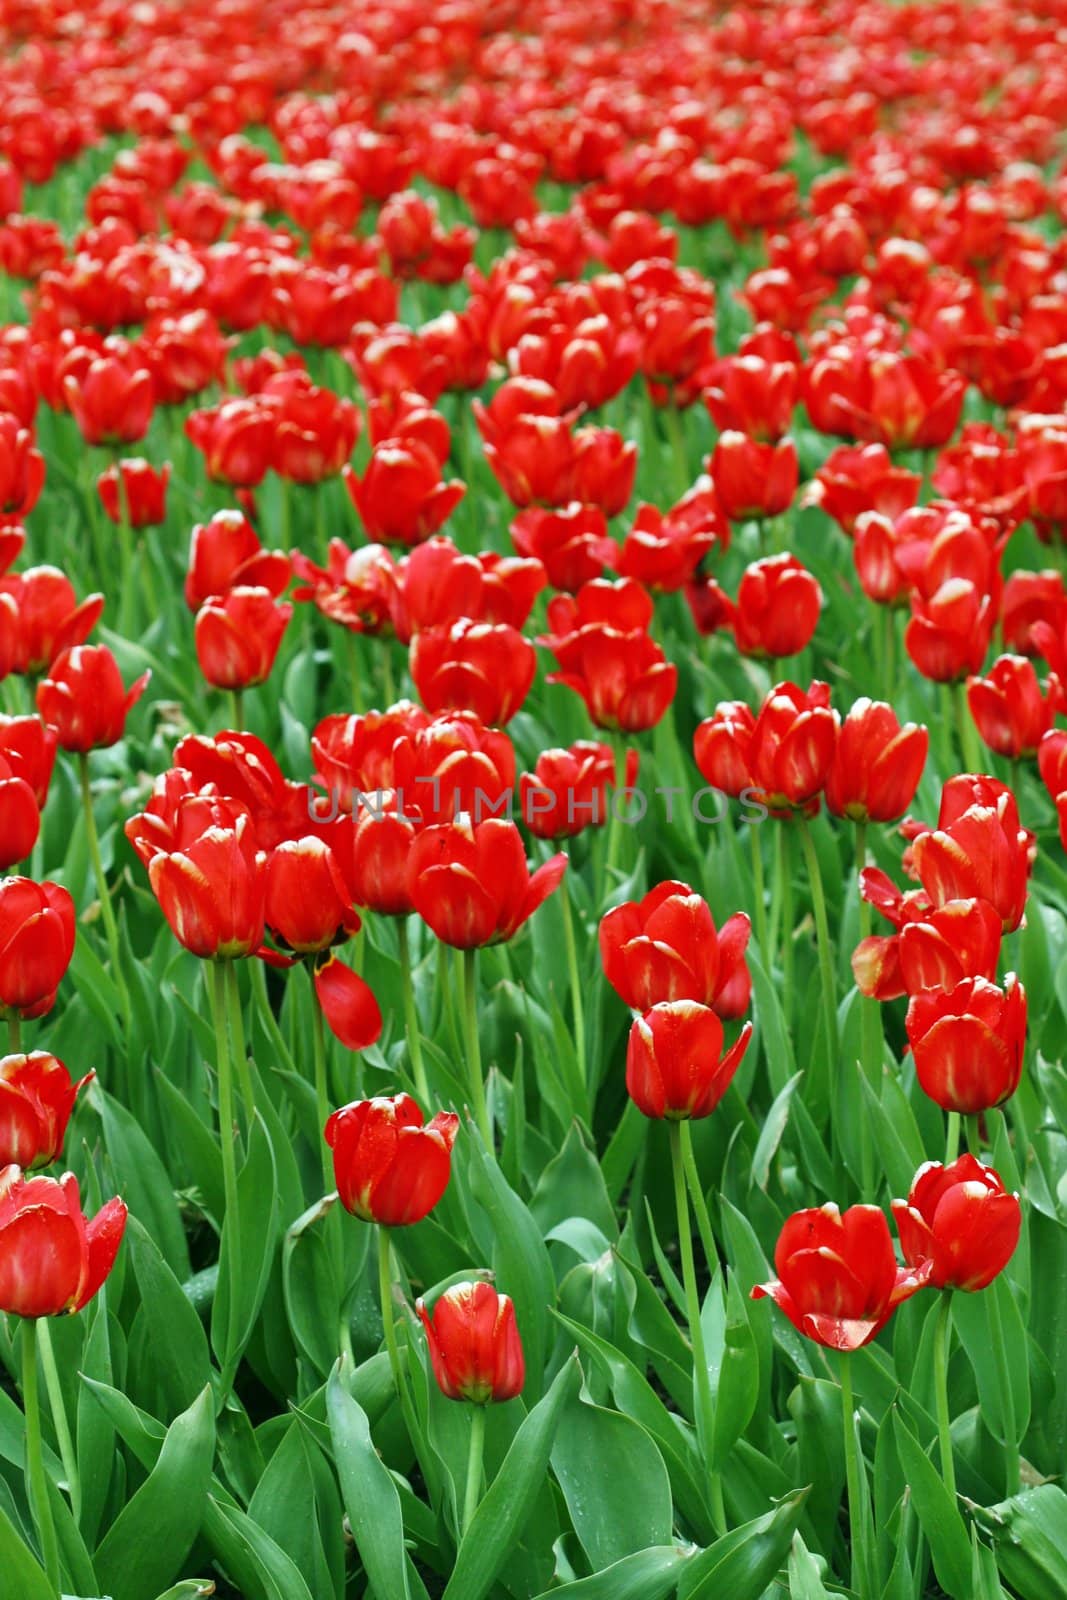 Beautiful tulip background - perfect for spring or summer designs